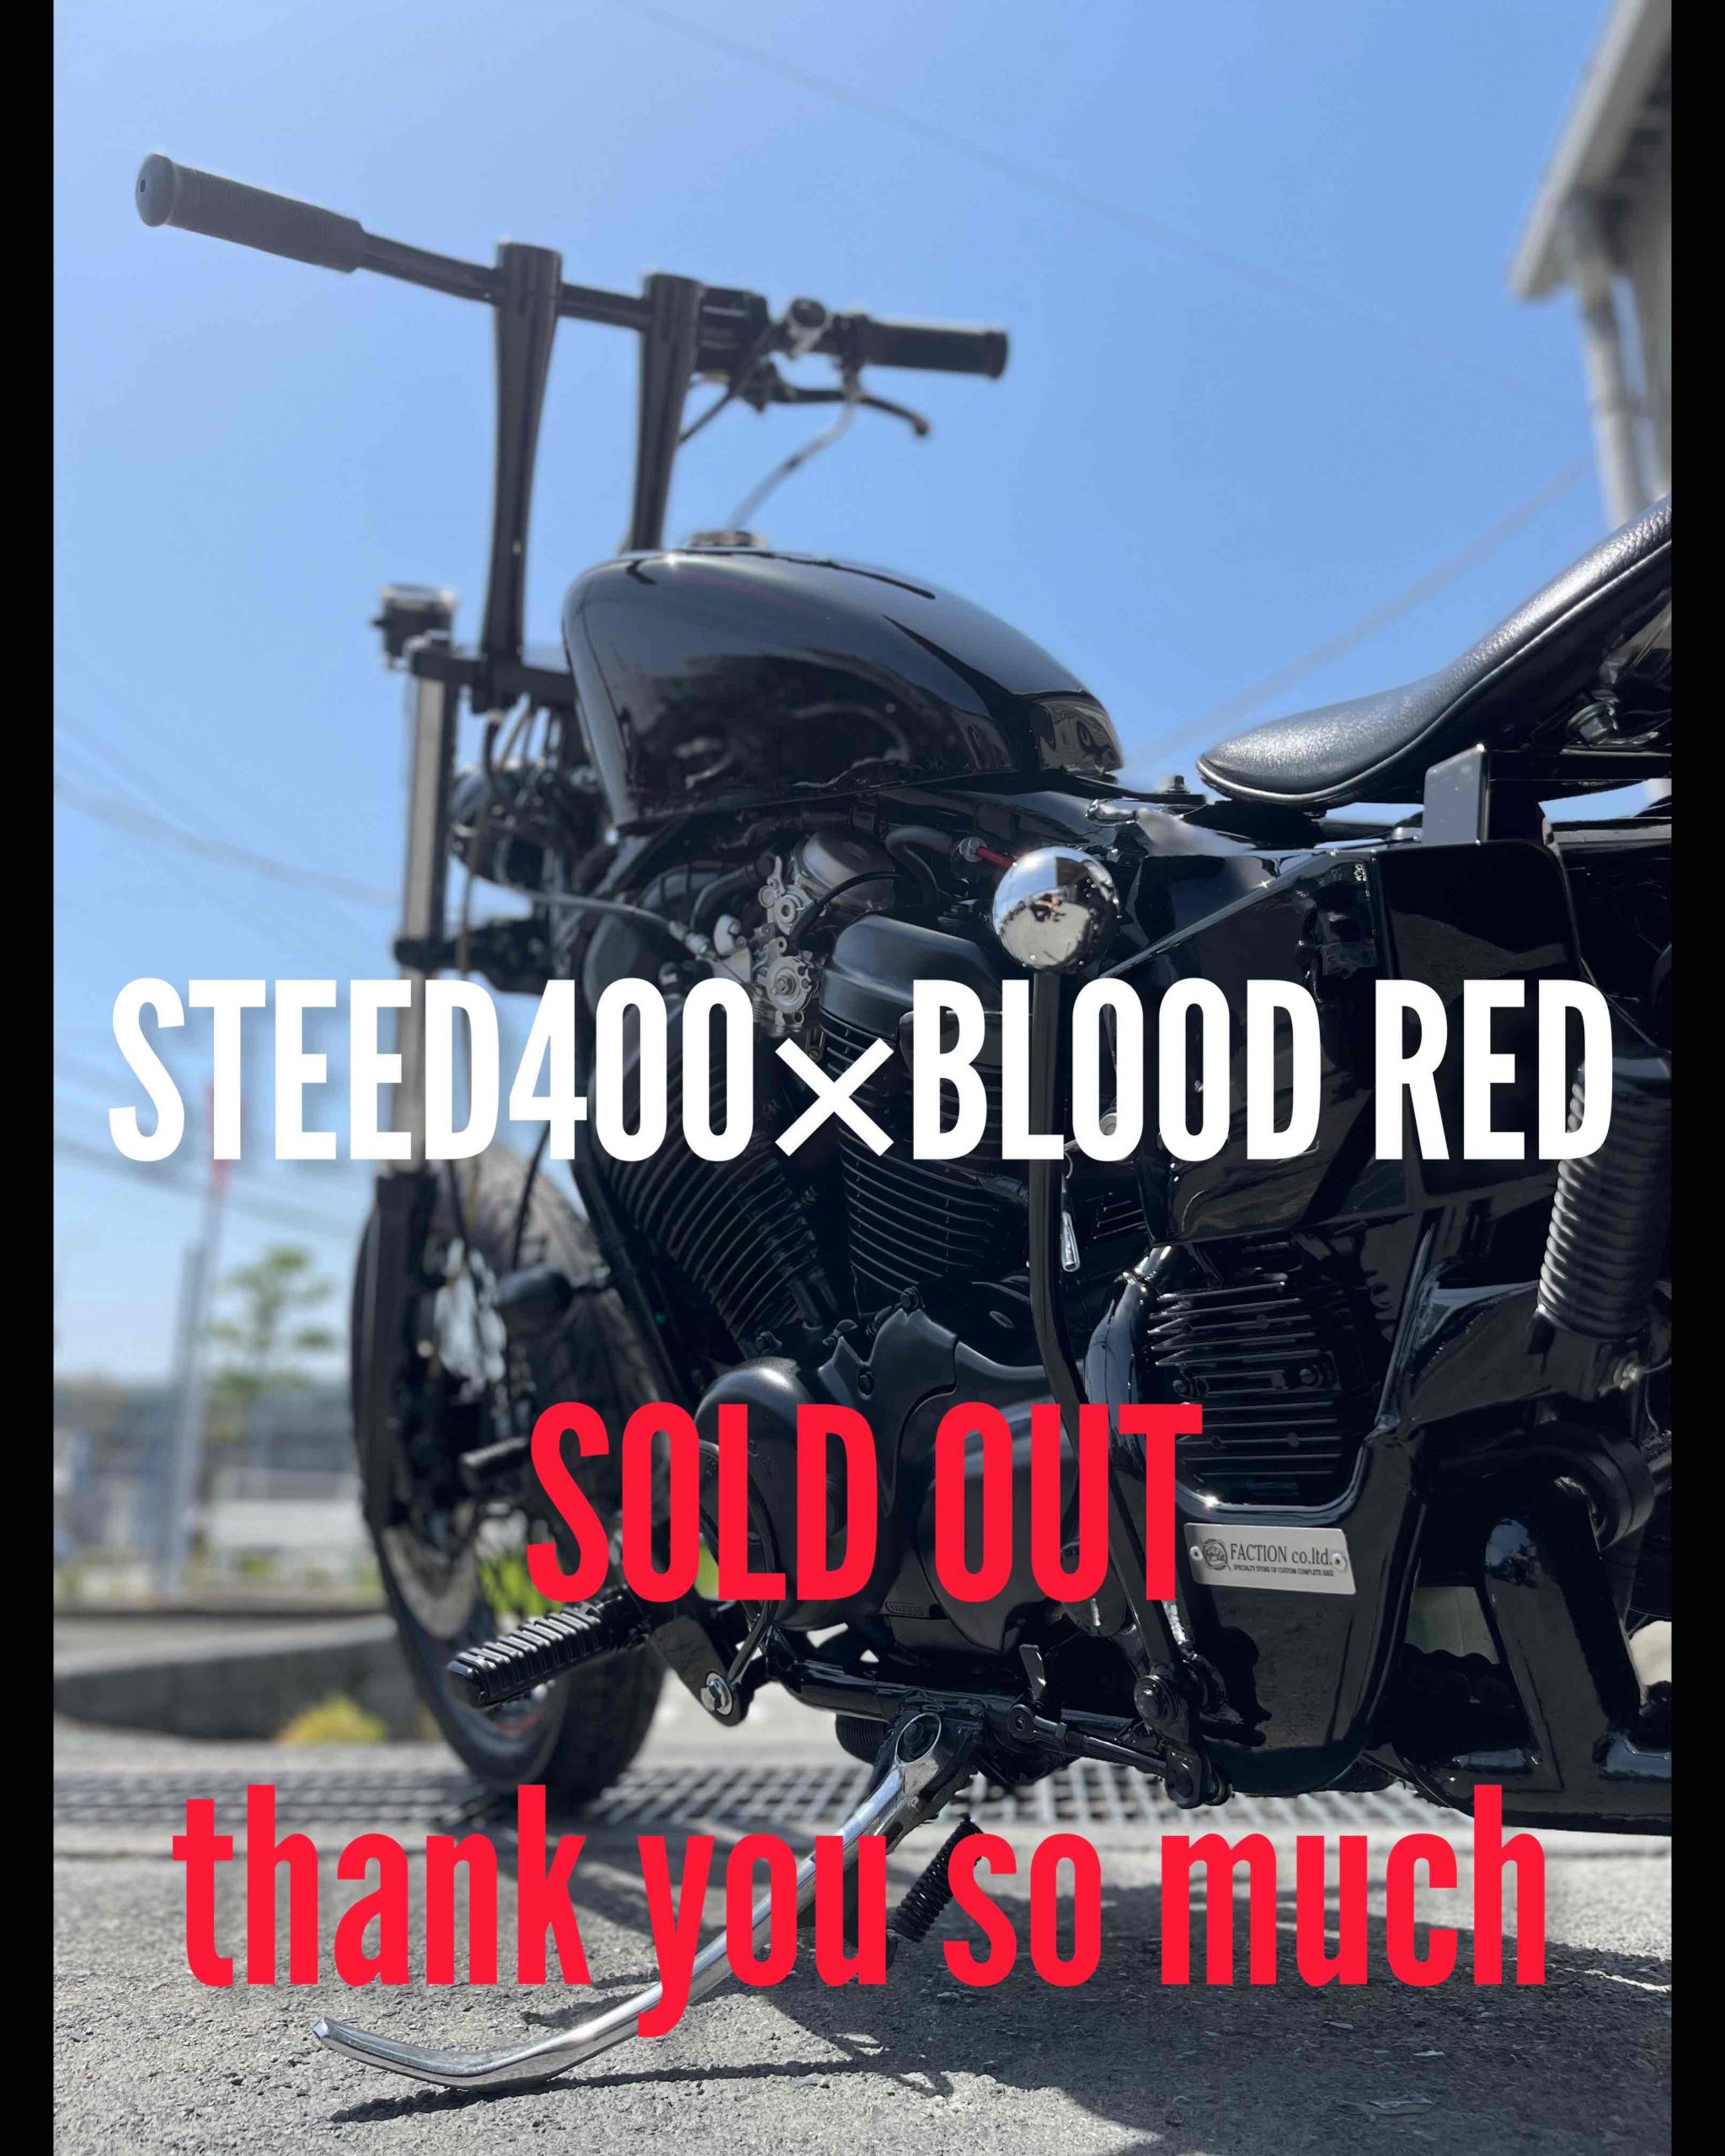 STEED400 FRISCO STYLE✖️BLOOD REDご成約ありがとうございました☆